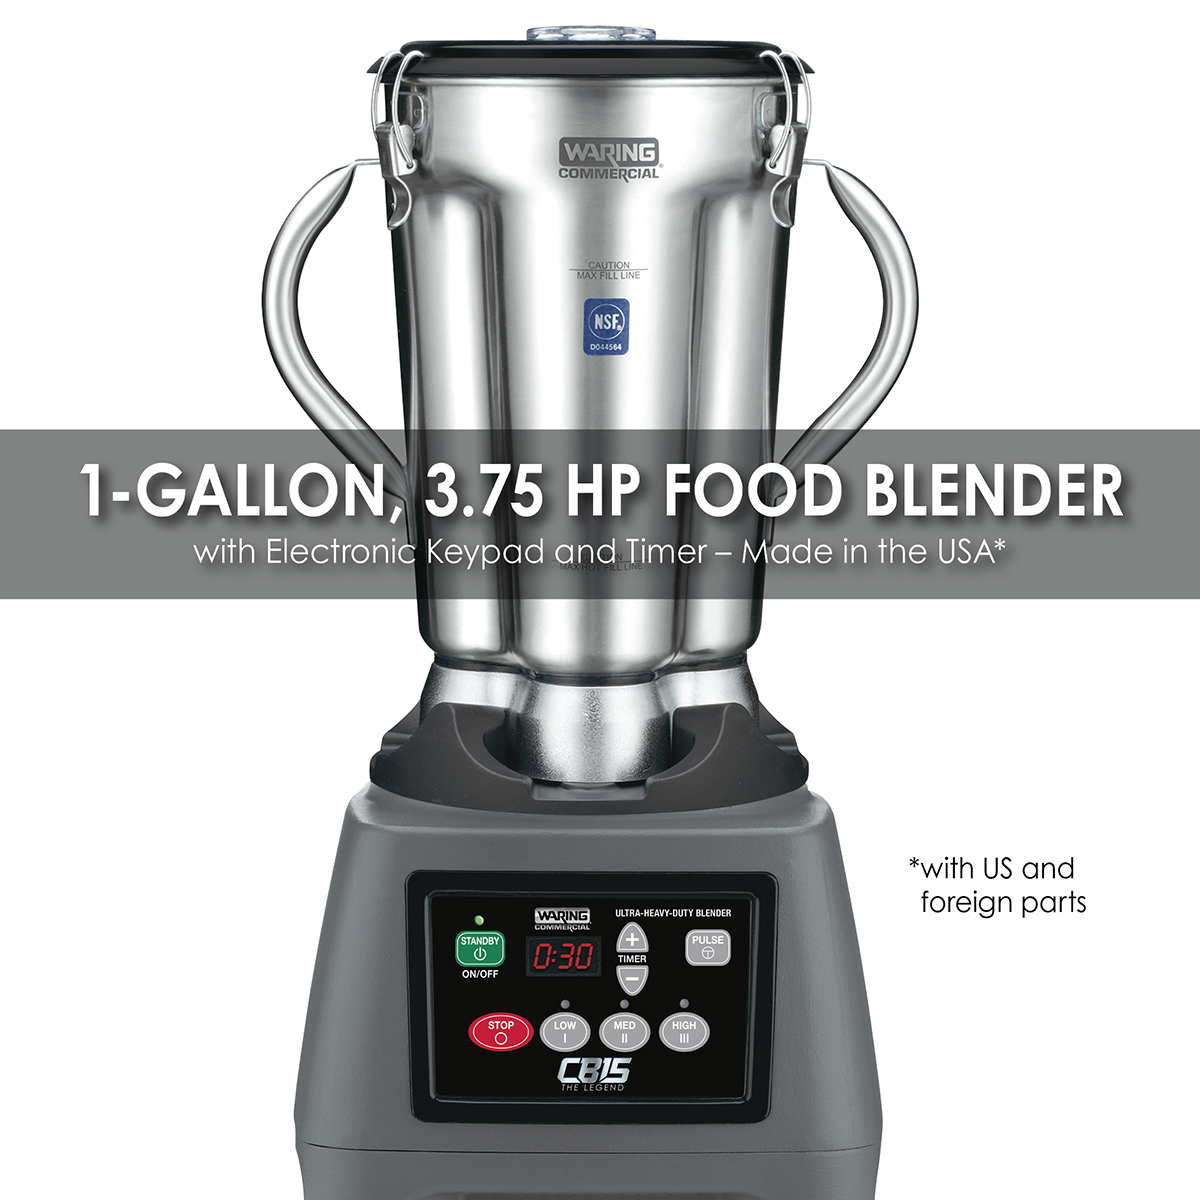 Waring Commercial One-Gallon 3.75 HP Food Blender with Spigot